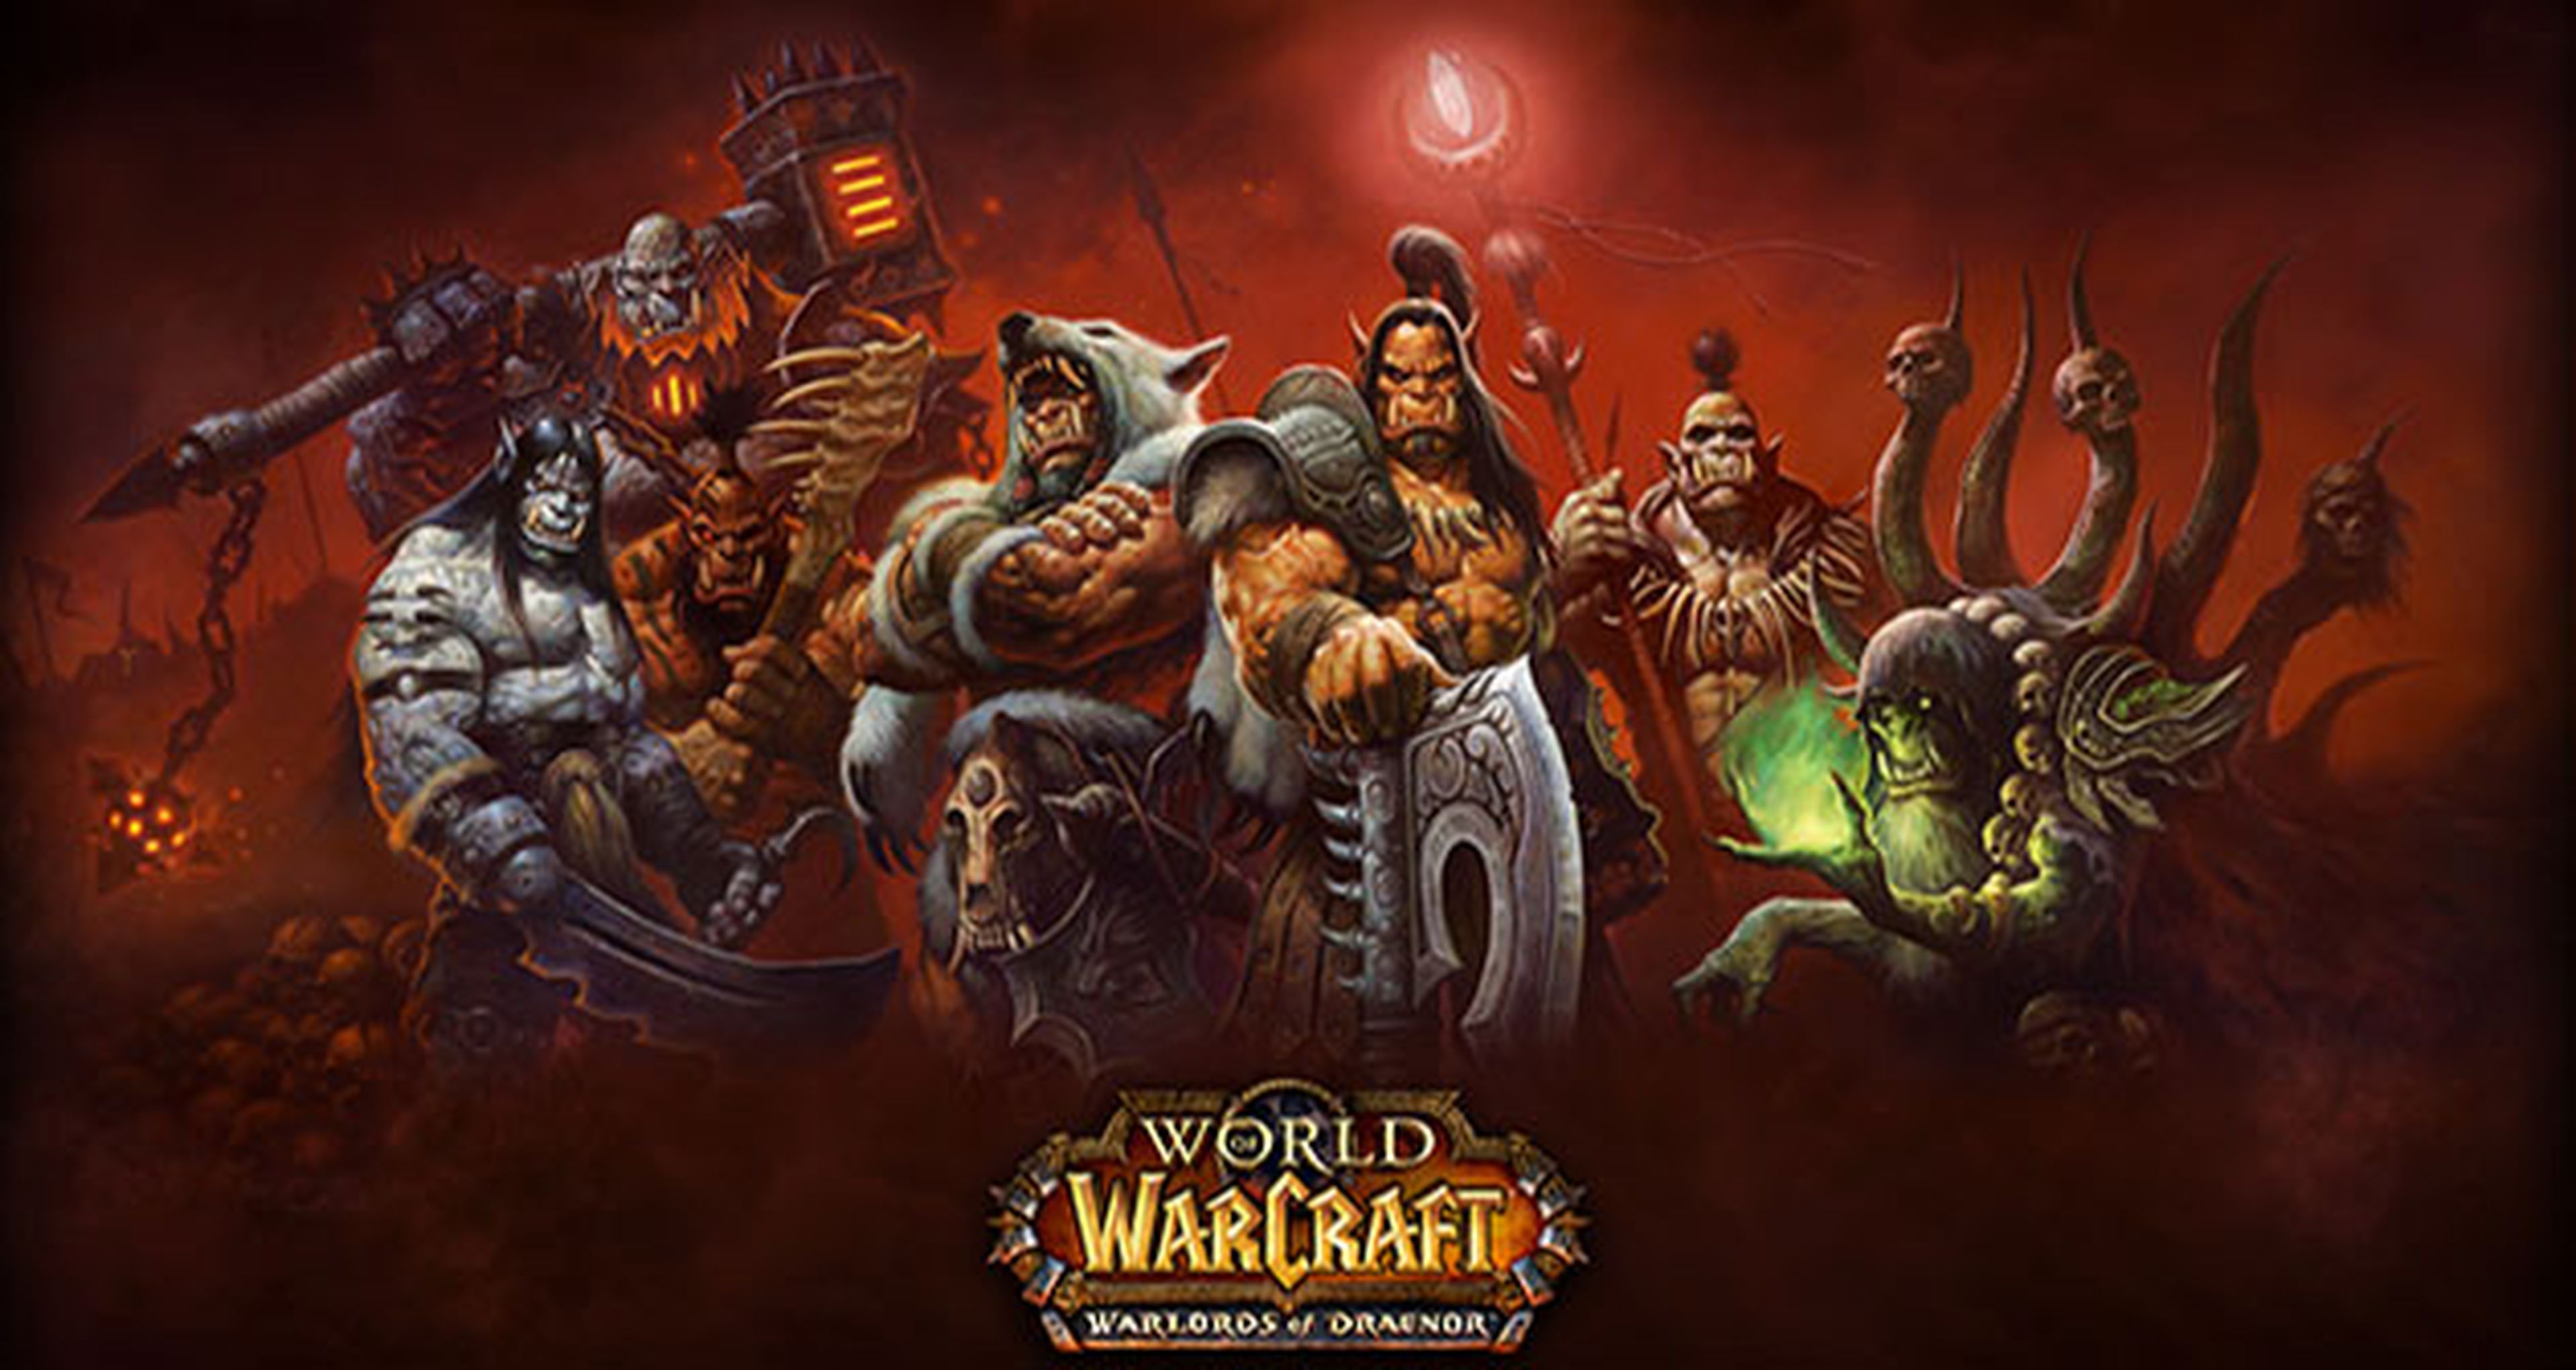 Análisis de World of Warcraft: Warlords of Draenor